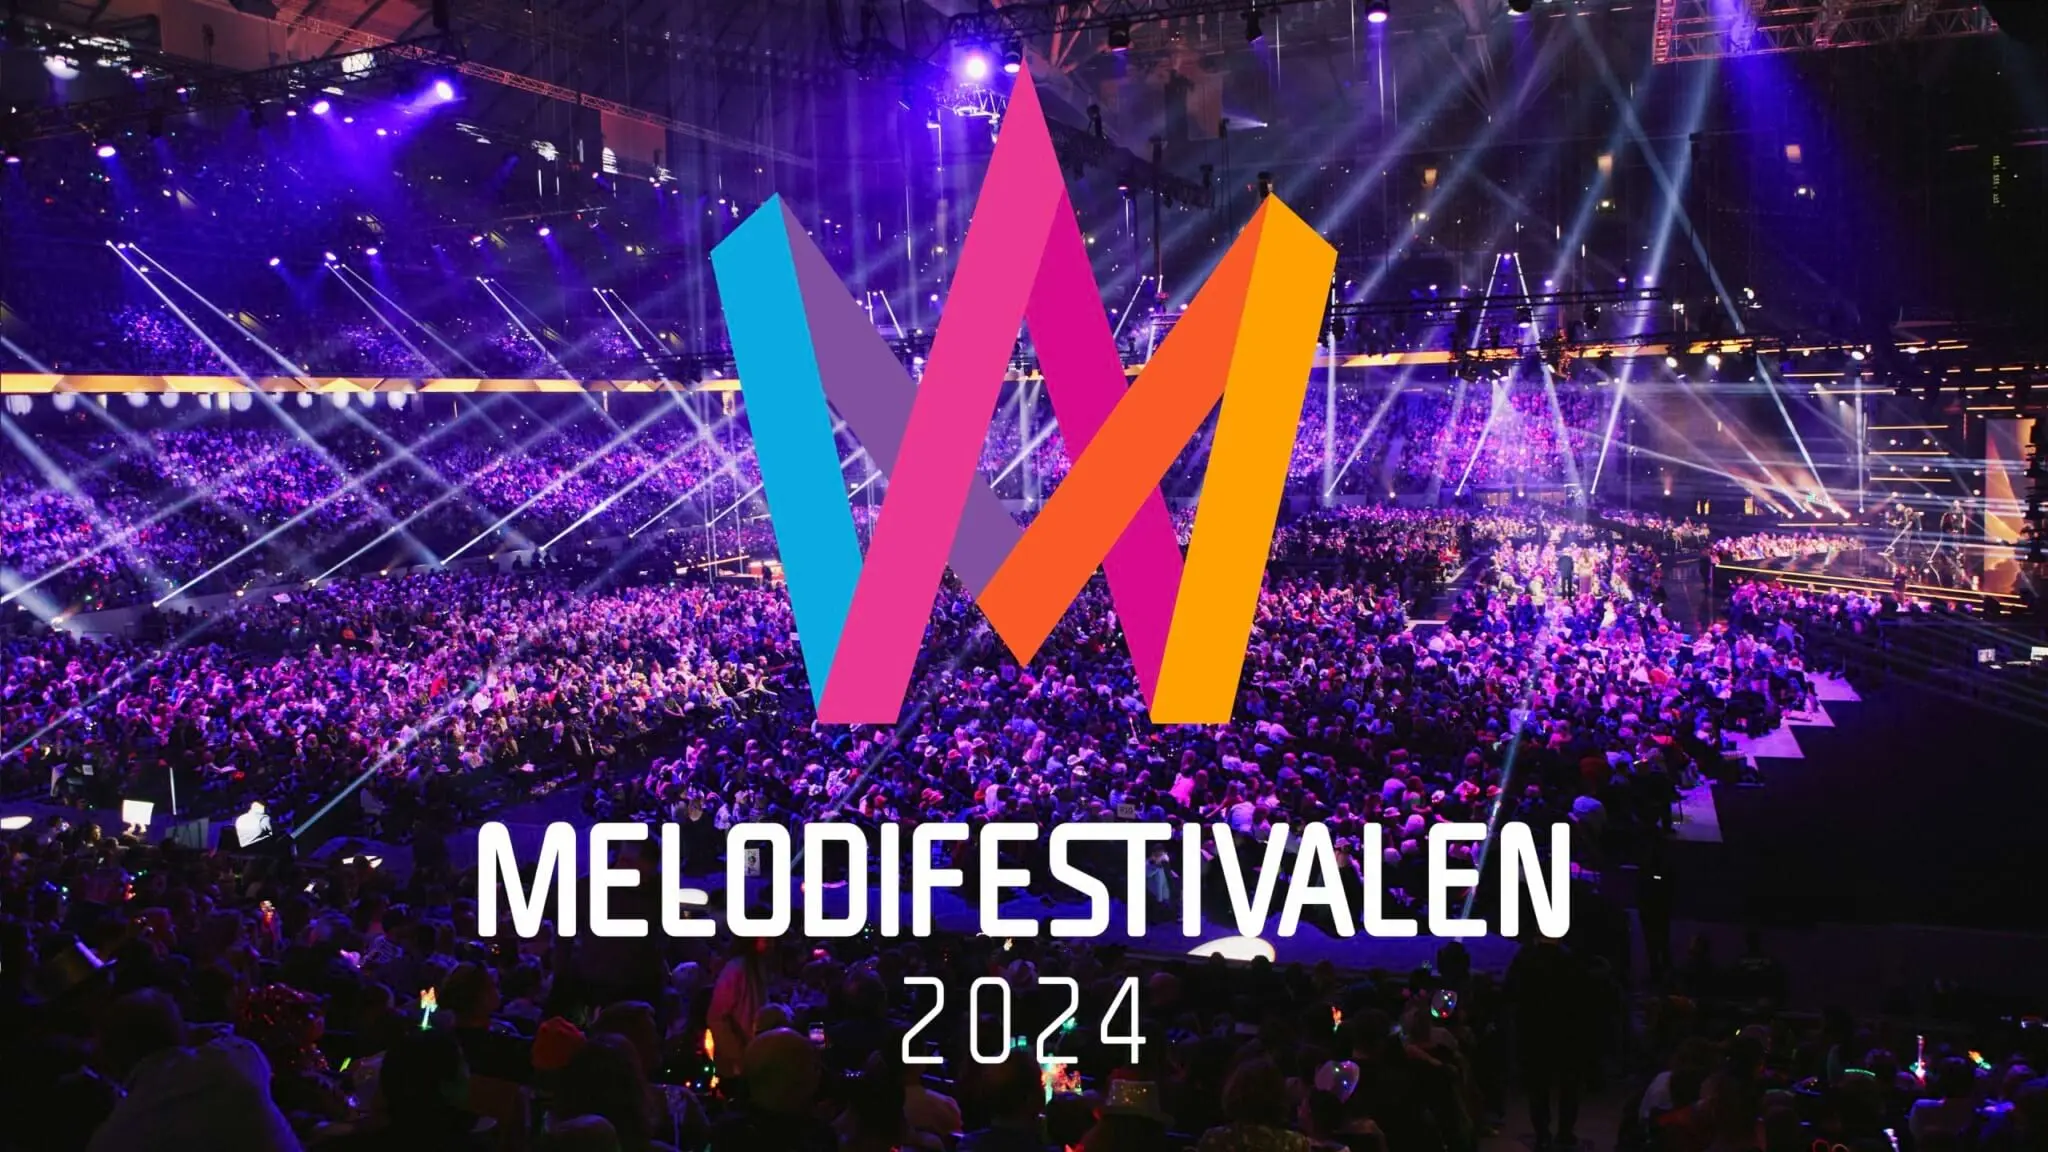 Artists competing at Melodifestivalen 2024, delivering electrifying performances in the quest for musical glory.